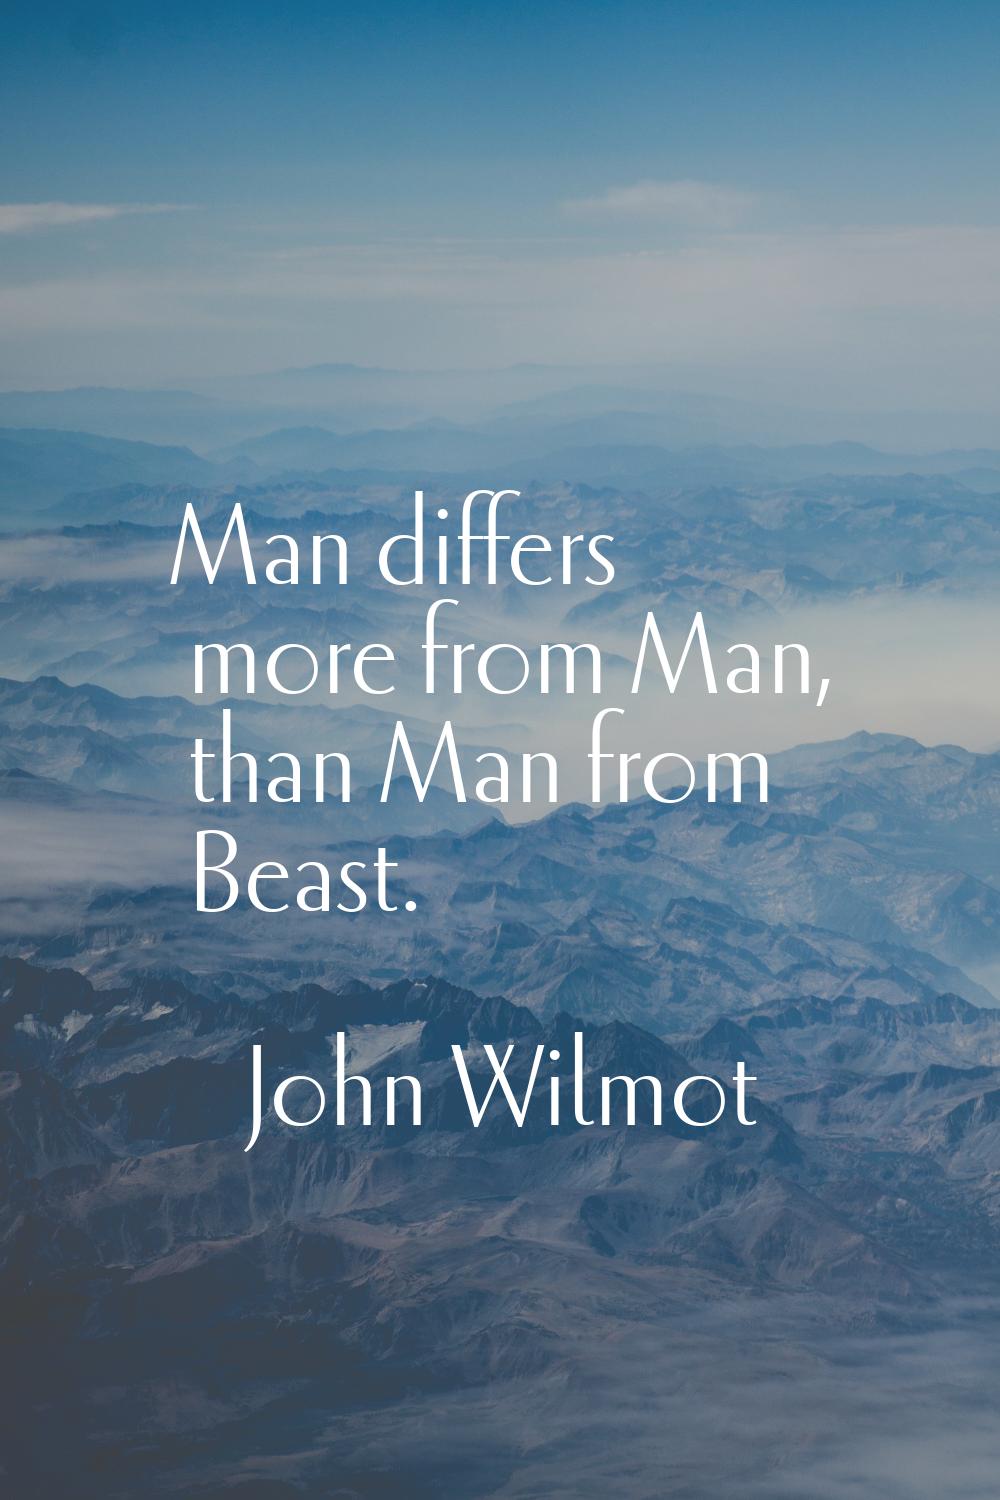 Man differs more from Man, than Man from Beast.